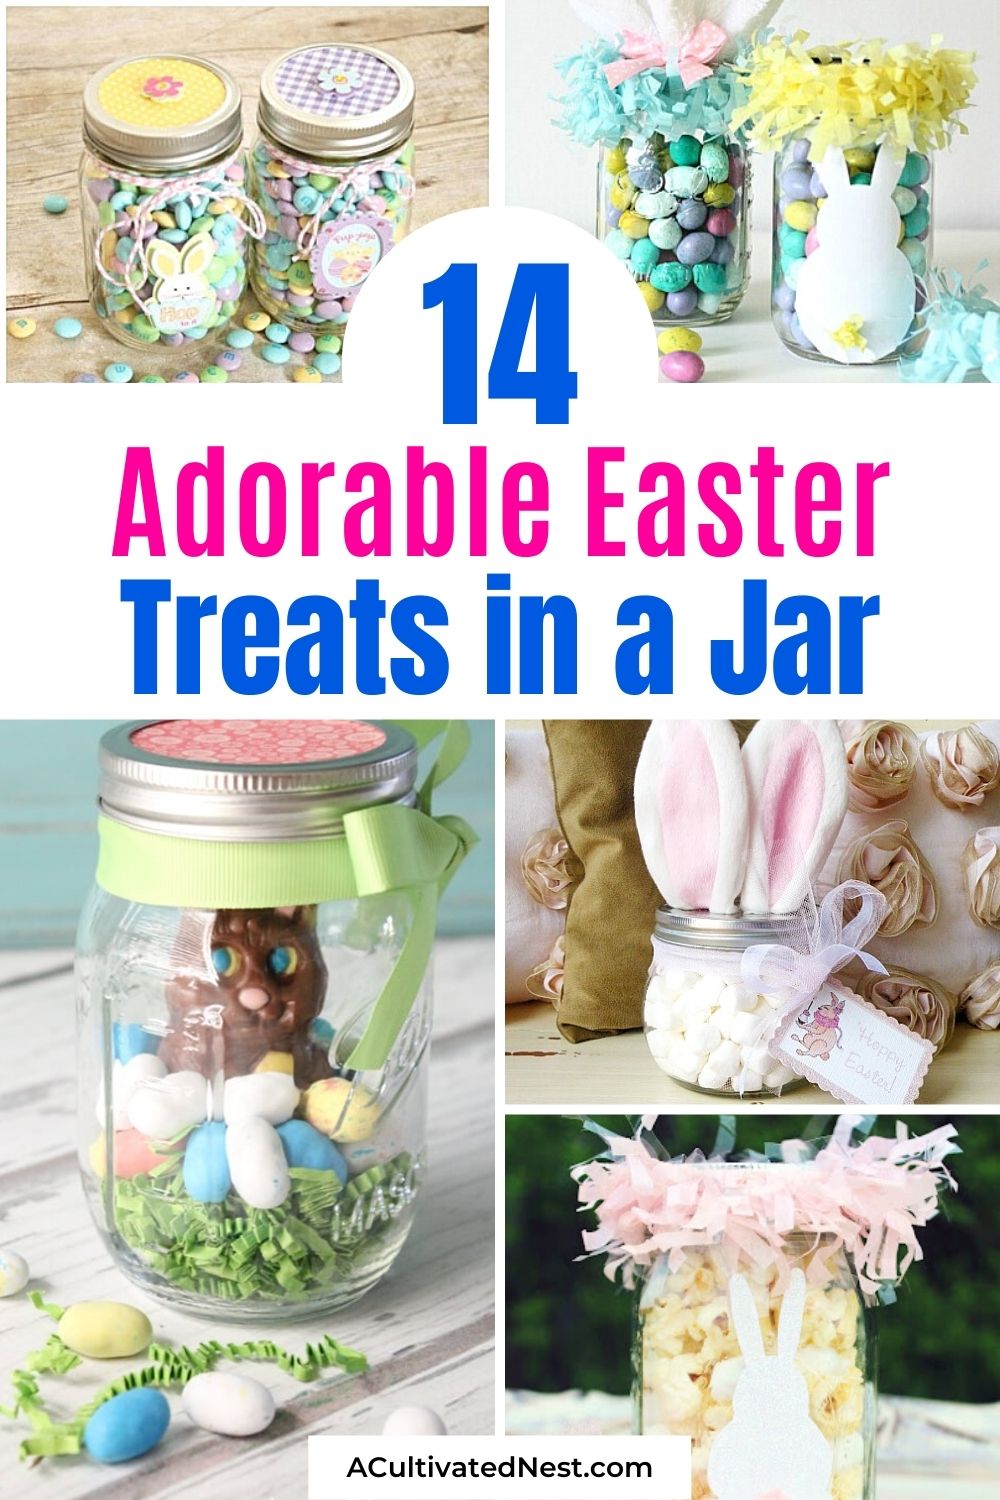 14 Cute Easter Treats In A Jar- Make some delicious (and adorable) treats in jars to give as gifts for Easter this year, or to include in Easter baskets! | #Easter #dessertRecipes #EasterBasket #EasterGifts #ACultivatedNest